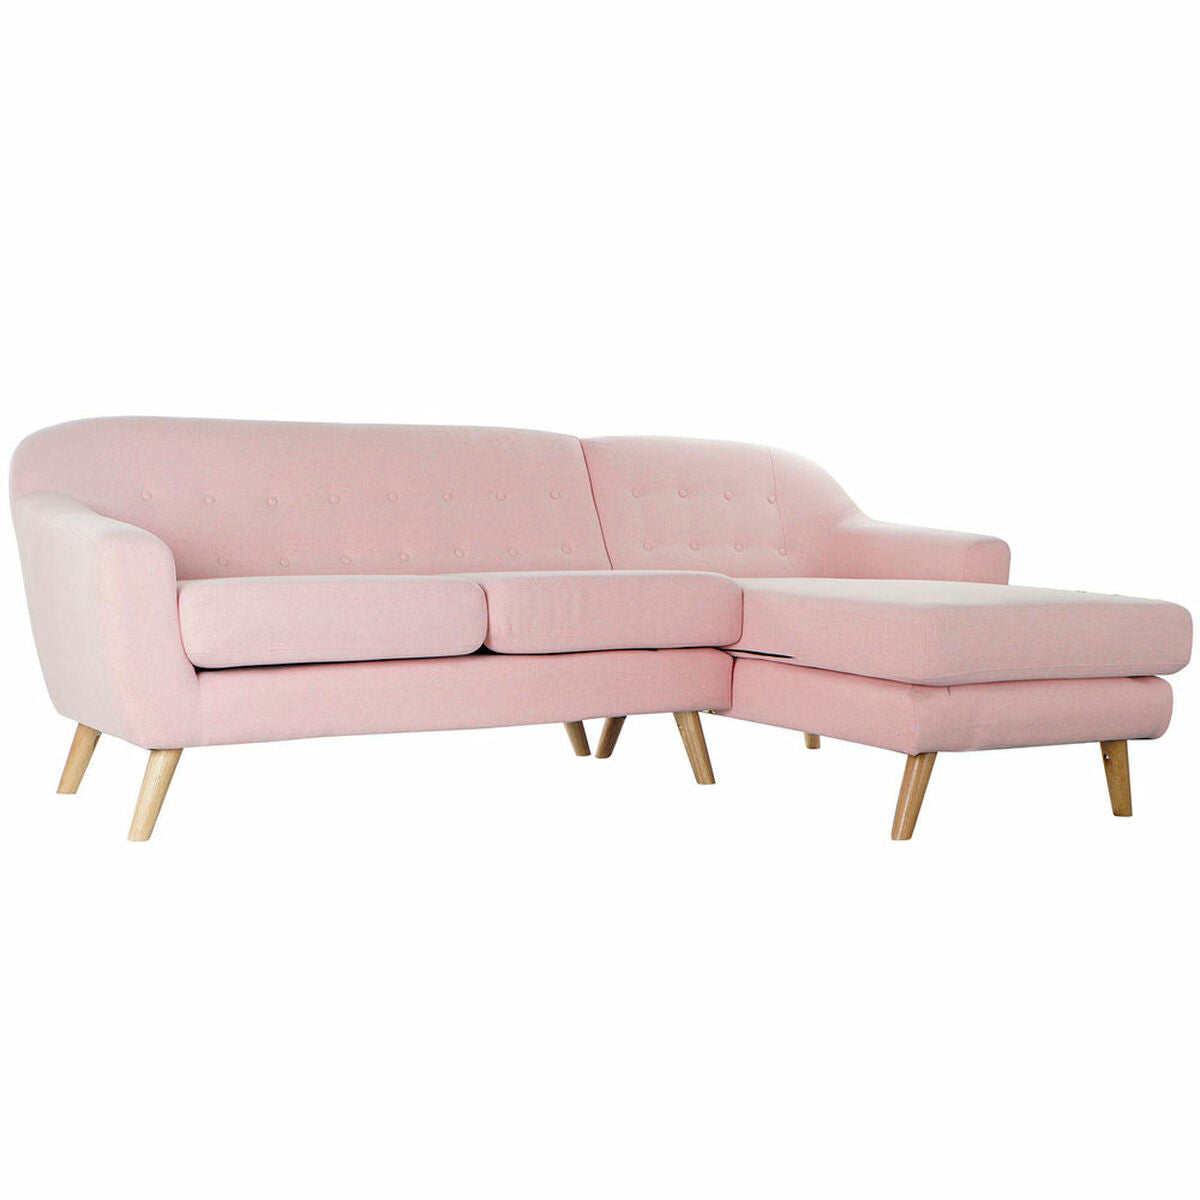 3-Seater Sofa DKD Home Decor Polyester Rubber wood Light Pink (226 x 144 x 84 cm)